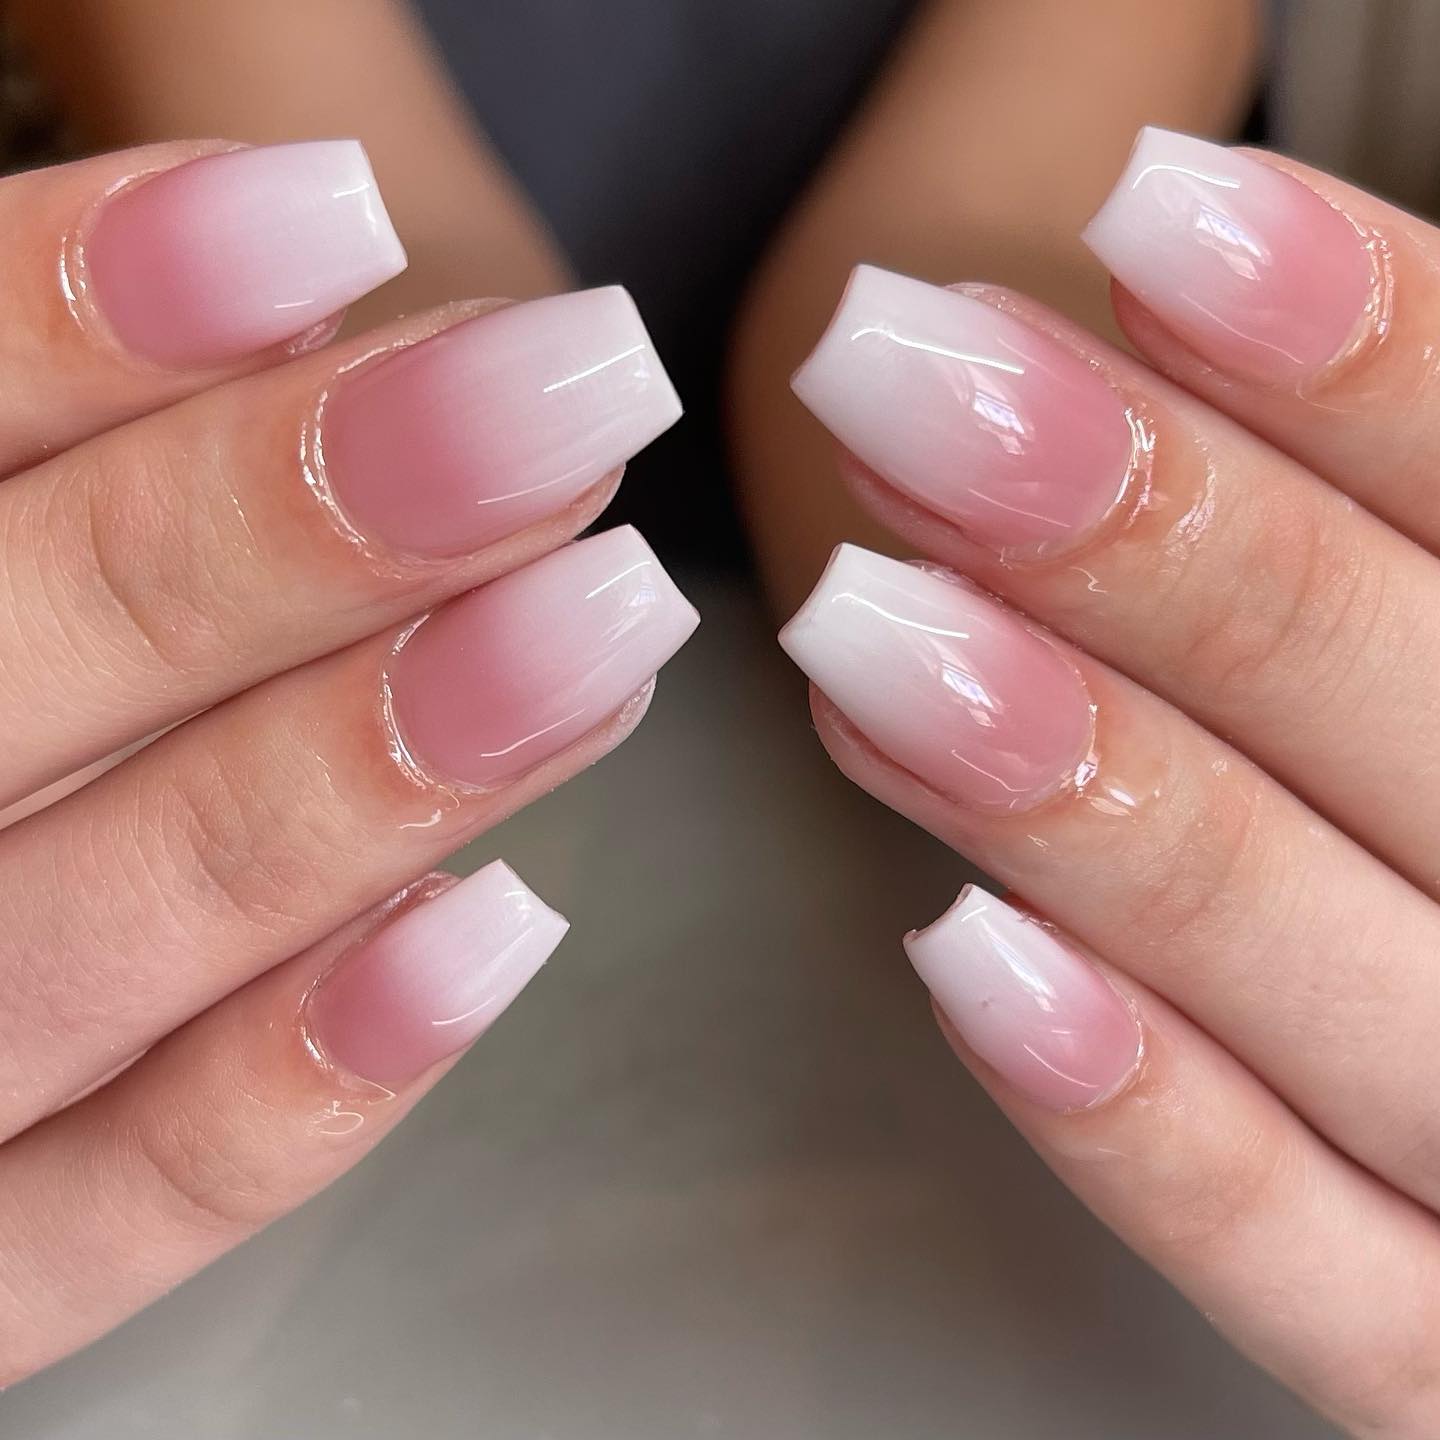 Wanna show everyone that you have a good taste? This bright and neat nail design will help you show everyone that you are a cool girl. Let's show off your beautiful long square ombre nails.